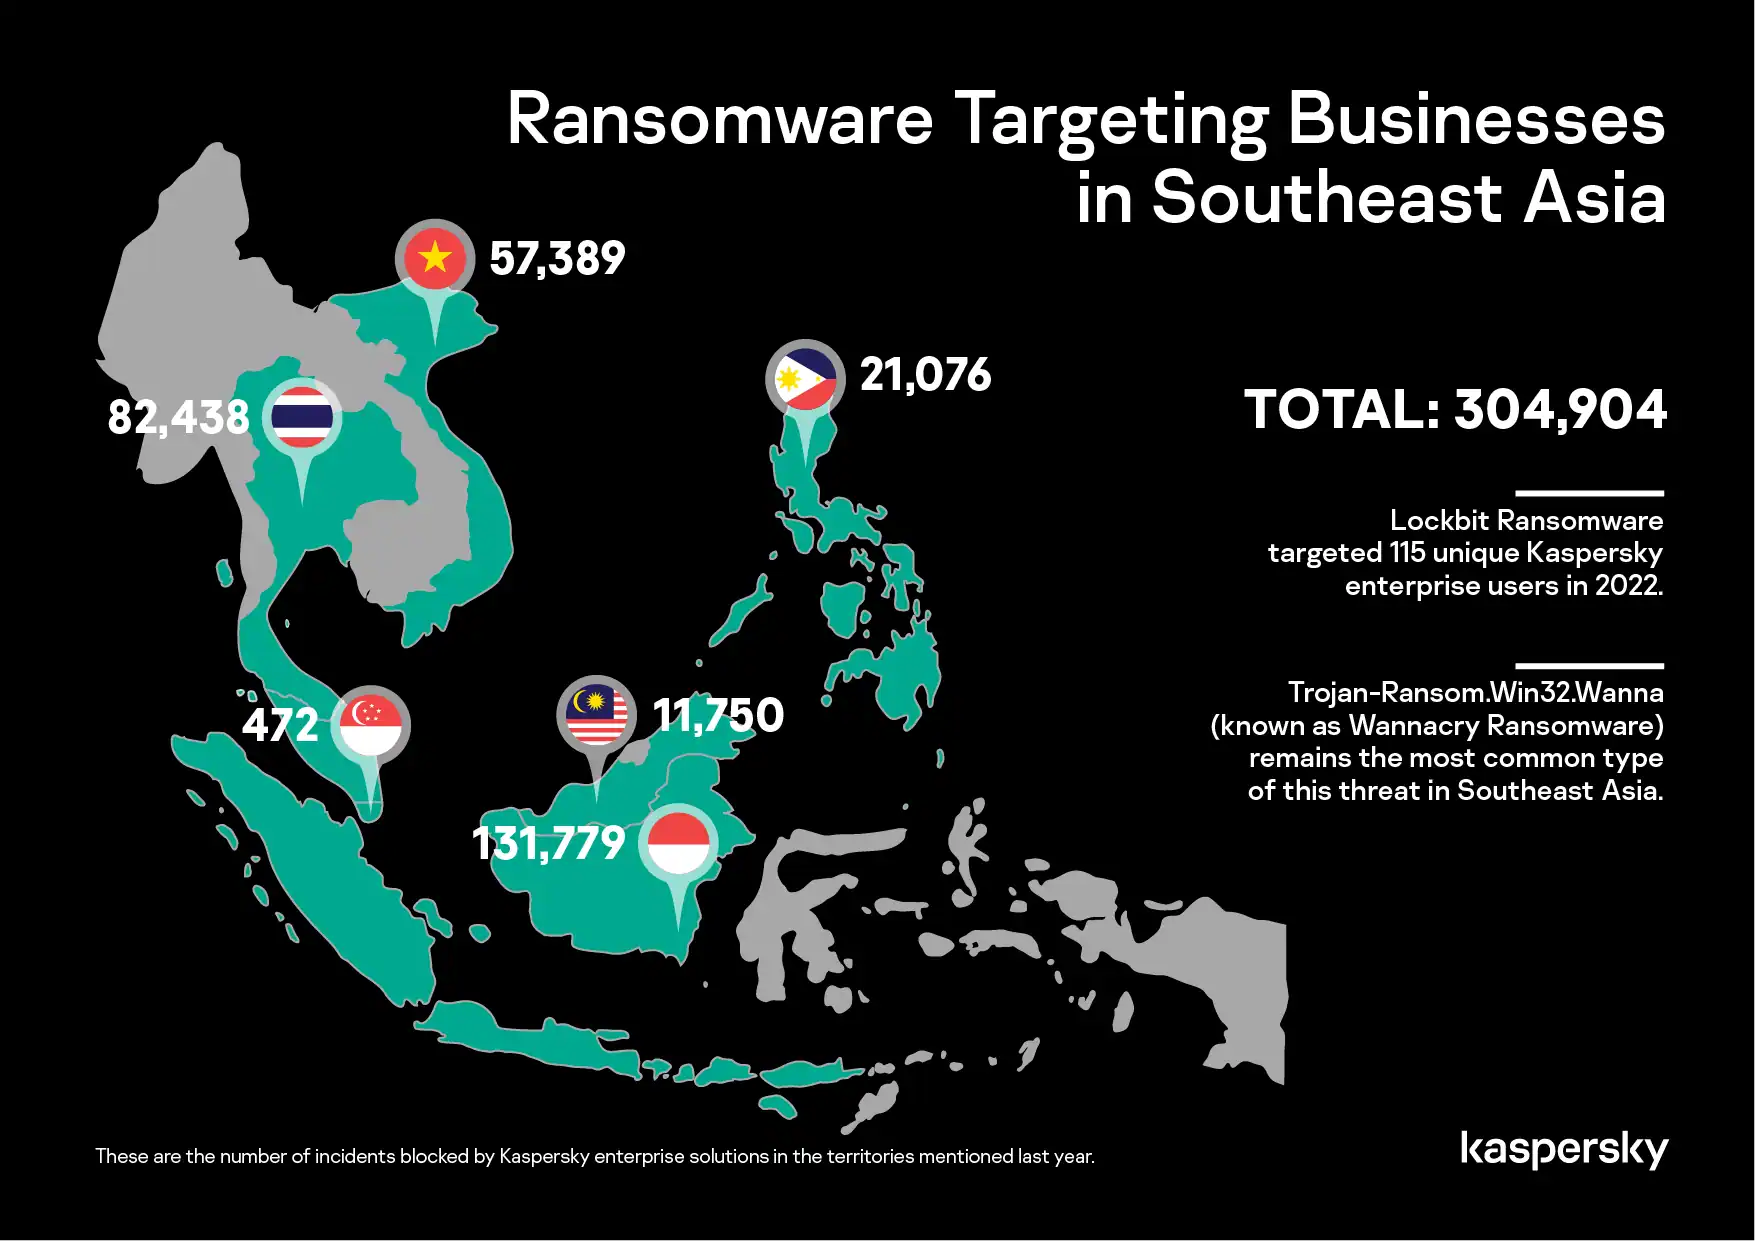 Ransomware Targeting Businesses in Southeast Asia